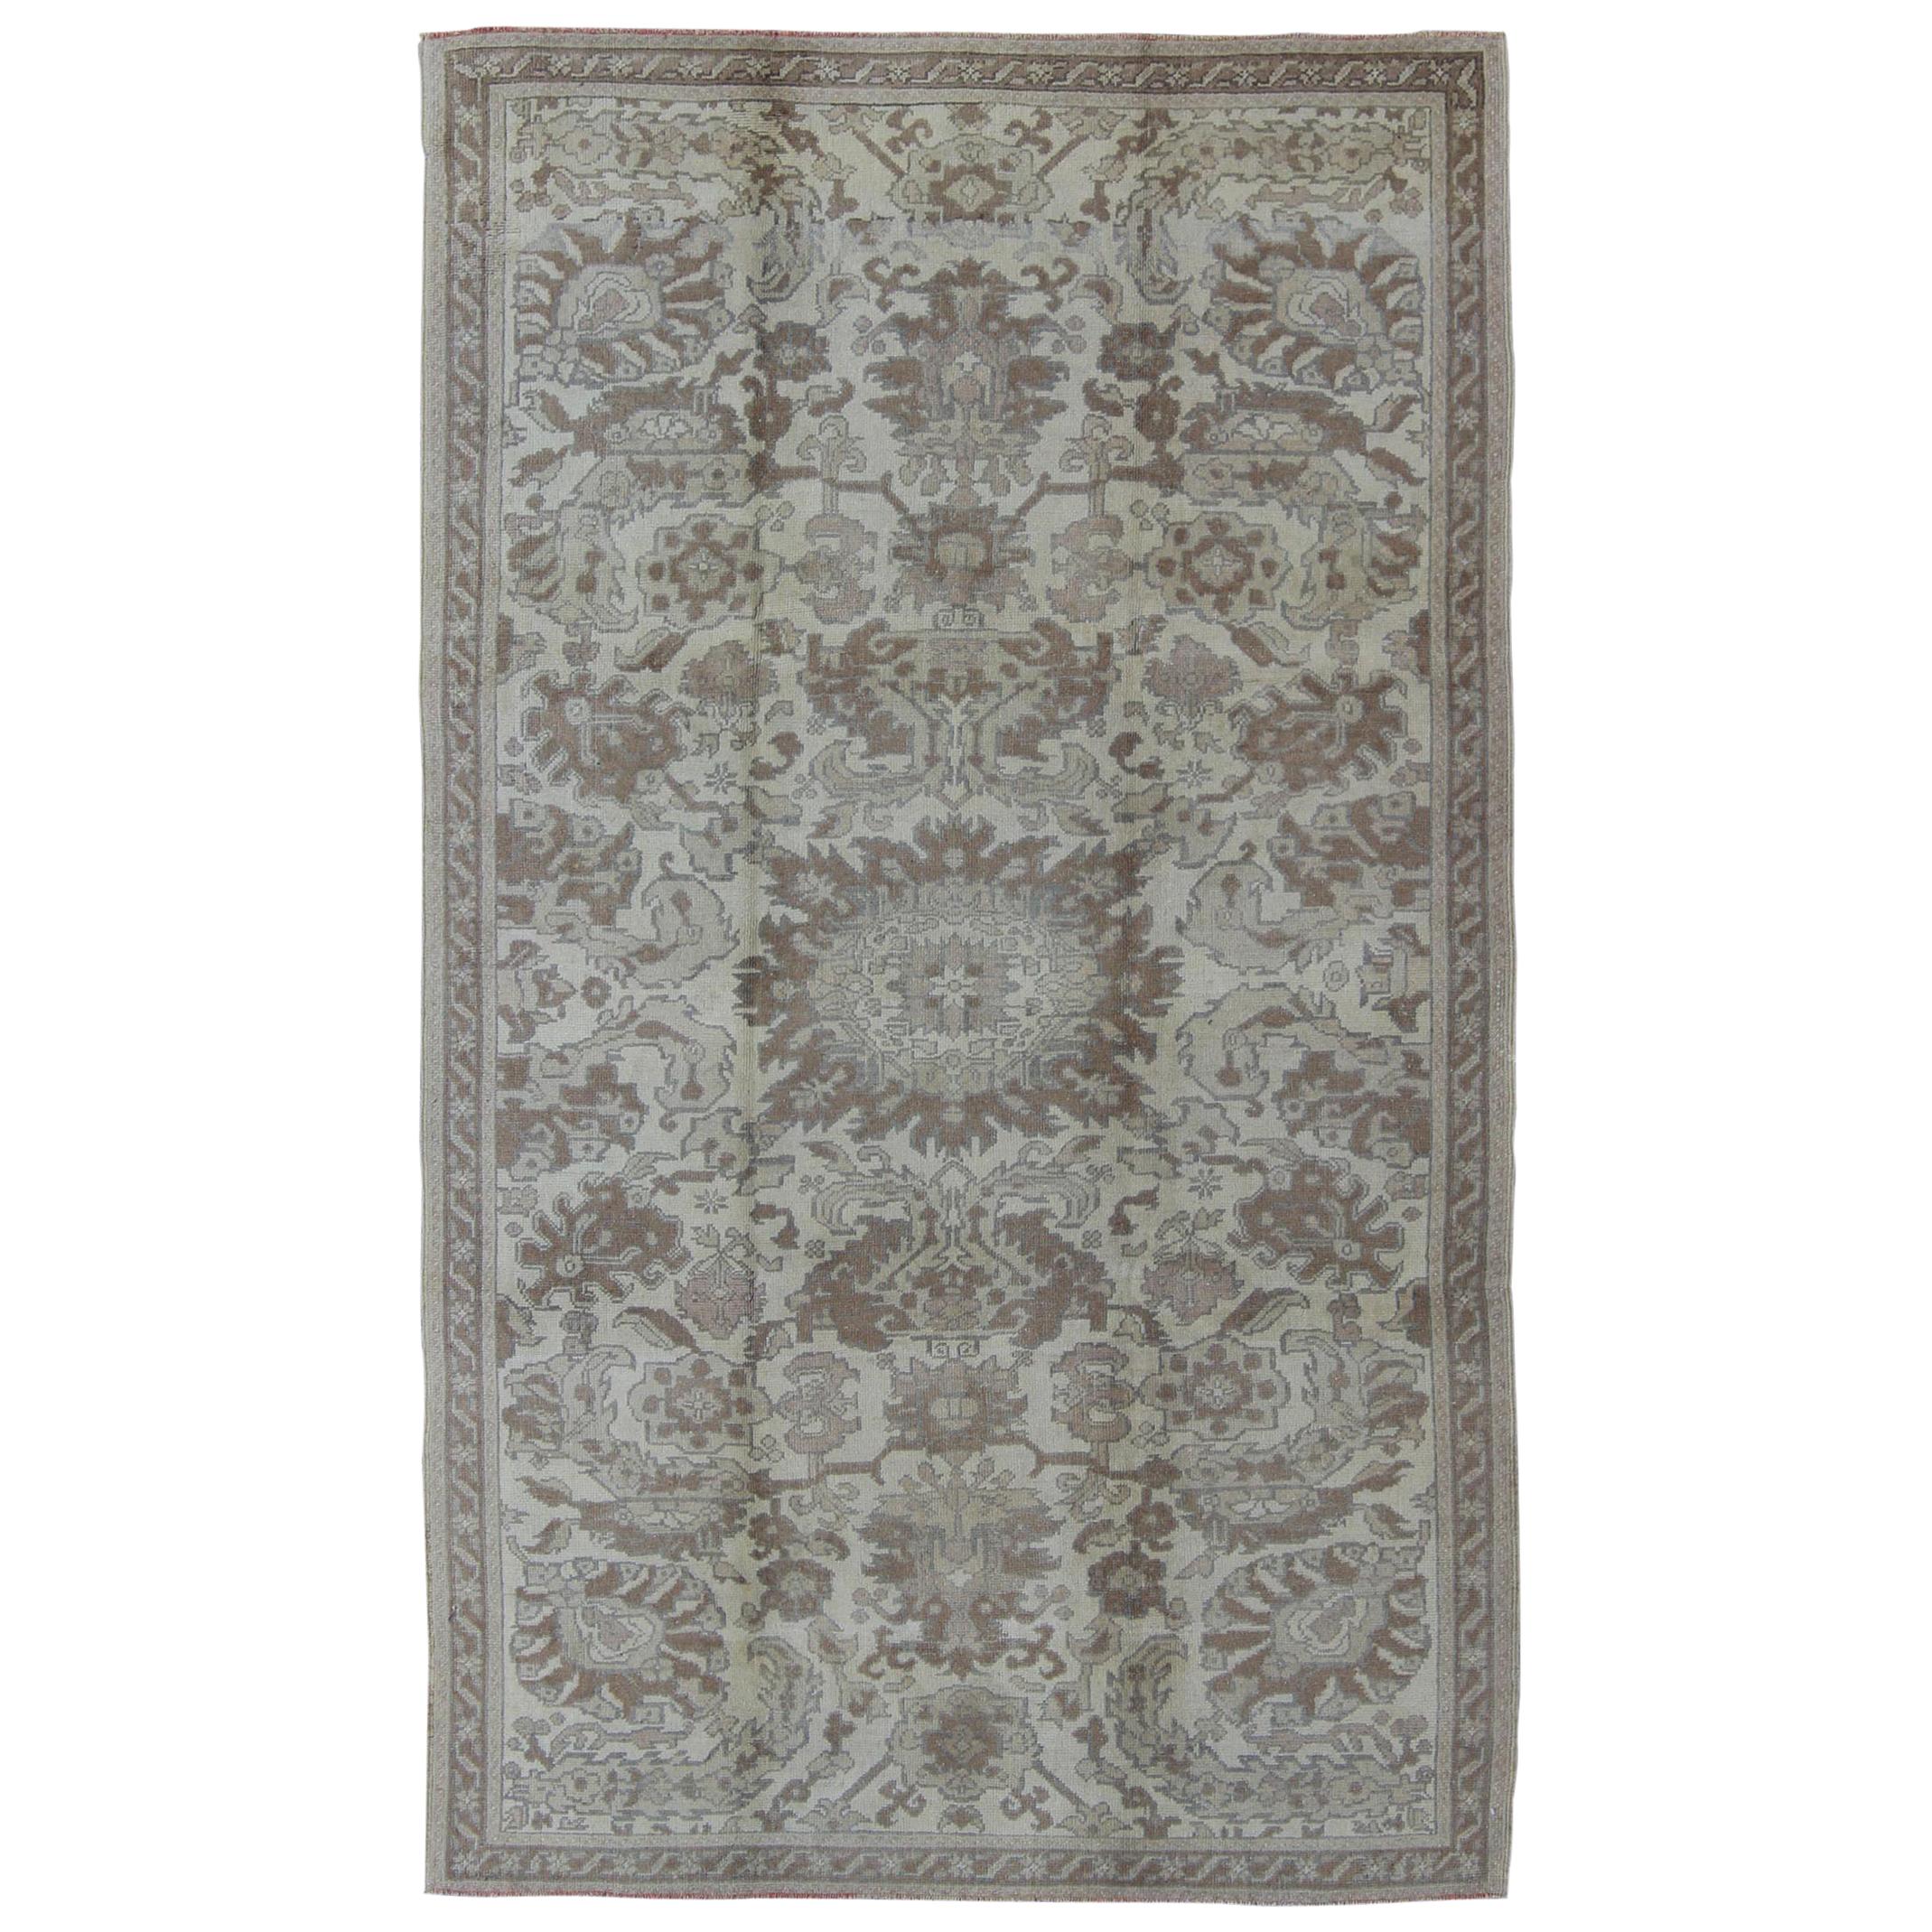 Earth Tone Vintage Turkish Oushak Rug with All-Over Floral Design For Sale